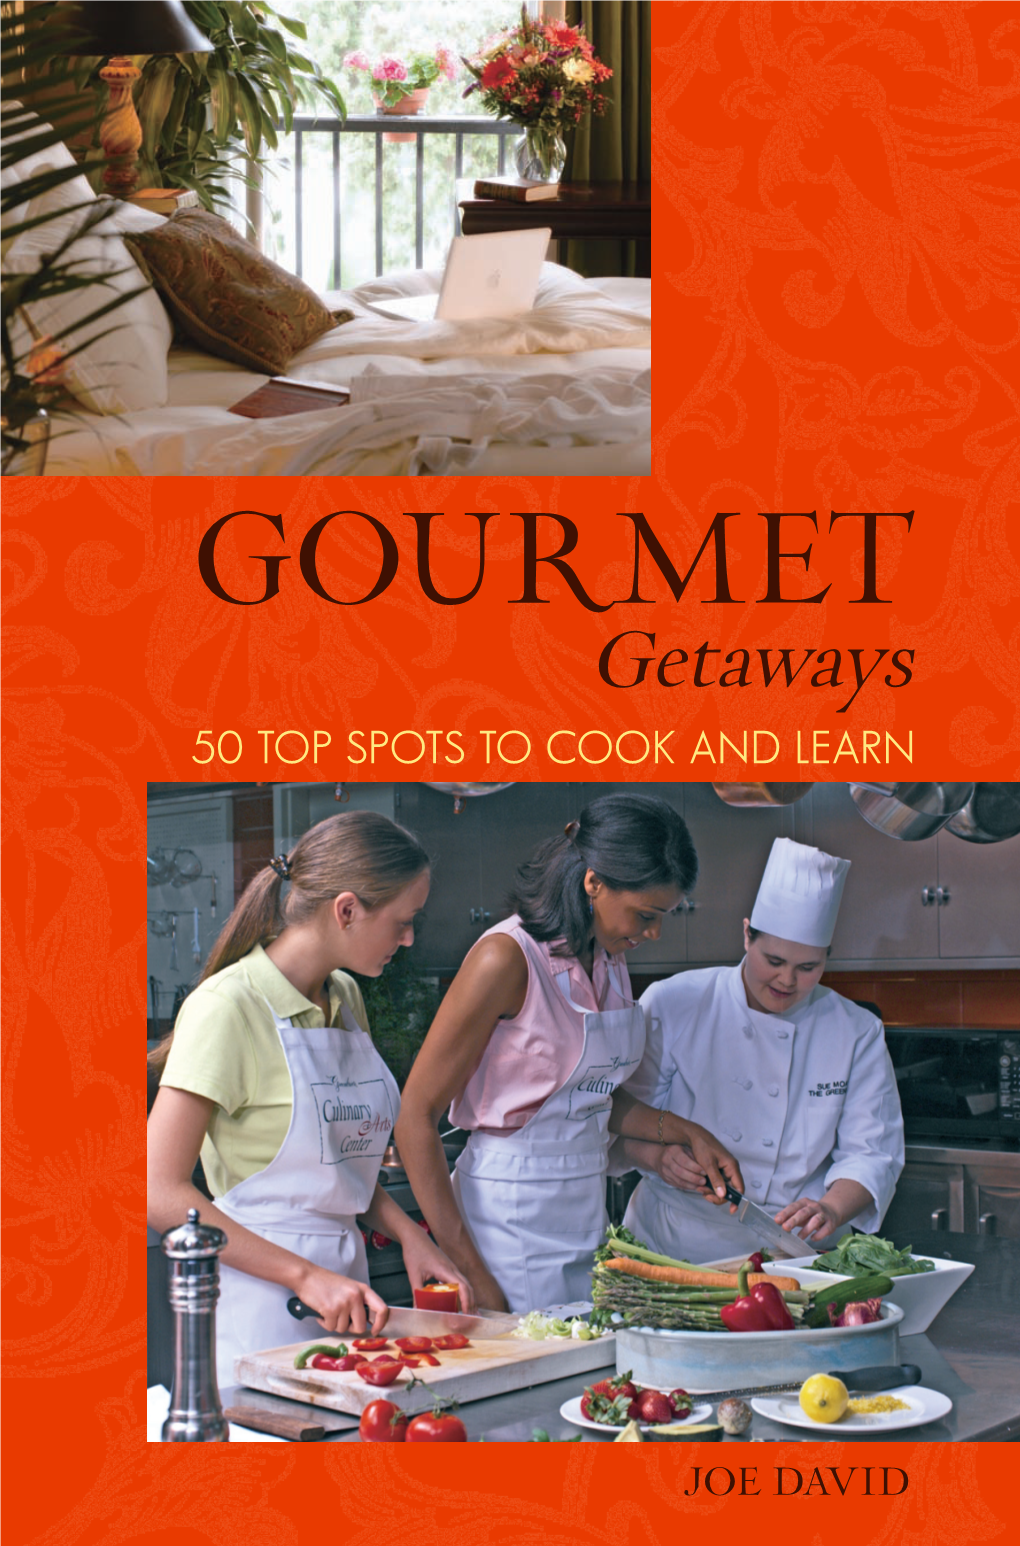 Gourmet Getaways Is a Must-Have for Foodies of All Tastes and Levels of Expertise—Whether You’Re a Budding Chef Or a Kitchen Diva